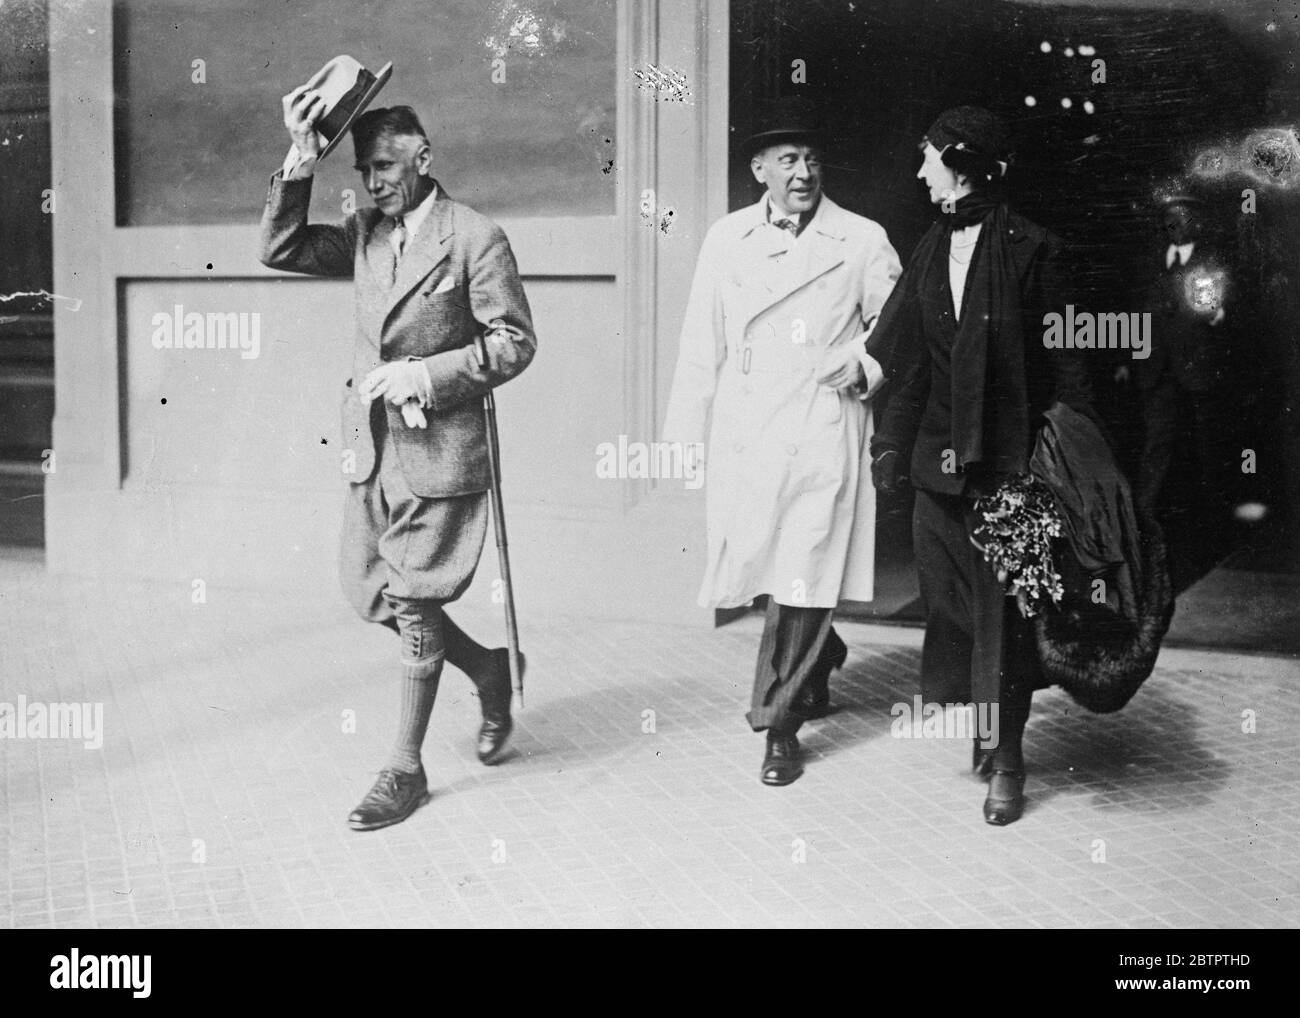 Von Papen in Rome . Vice Chancellor Von Papen of Germany arrived in Rome accompanied by Frau Von Papen . He is having discussions with Italian statesmen . Vice Chancellor Von Papen ( in front ) on arrival in Rome . Behind is Frau Von Papen . 16 April 1934 Stock Photo